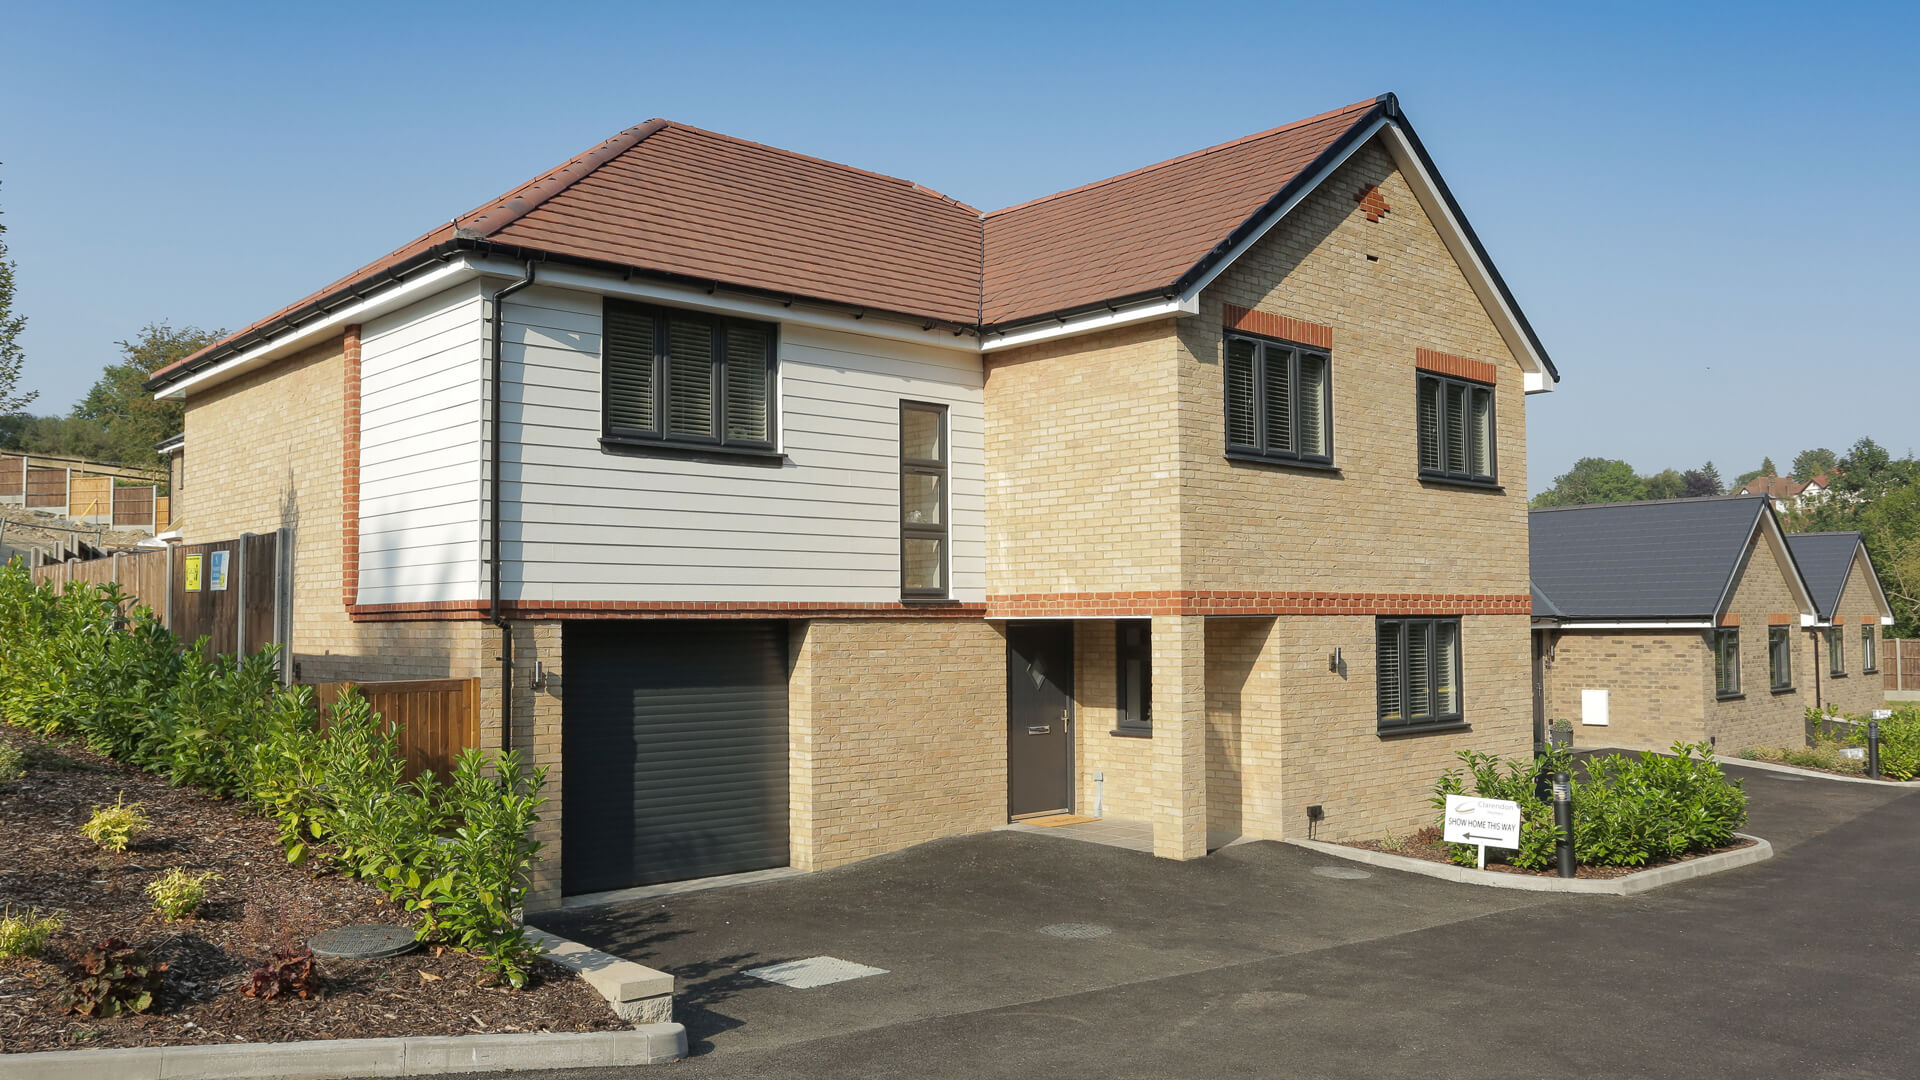 New build detached property at Woodside court.